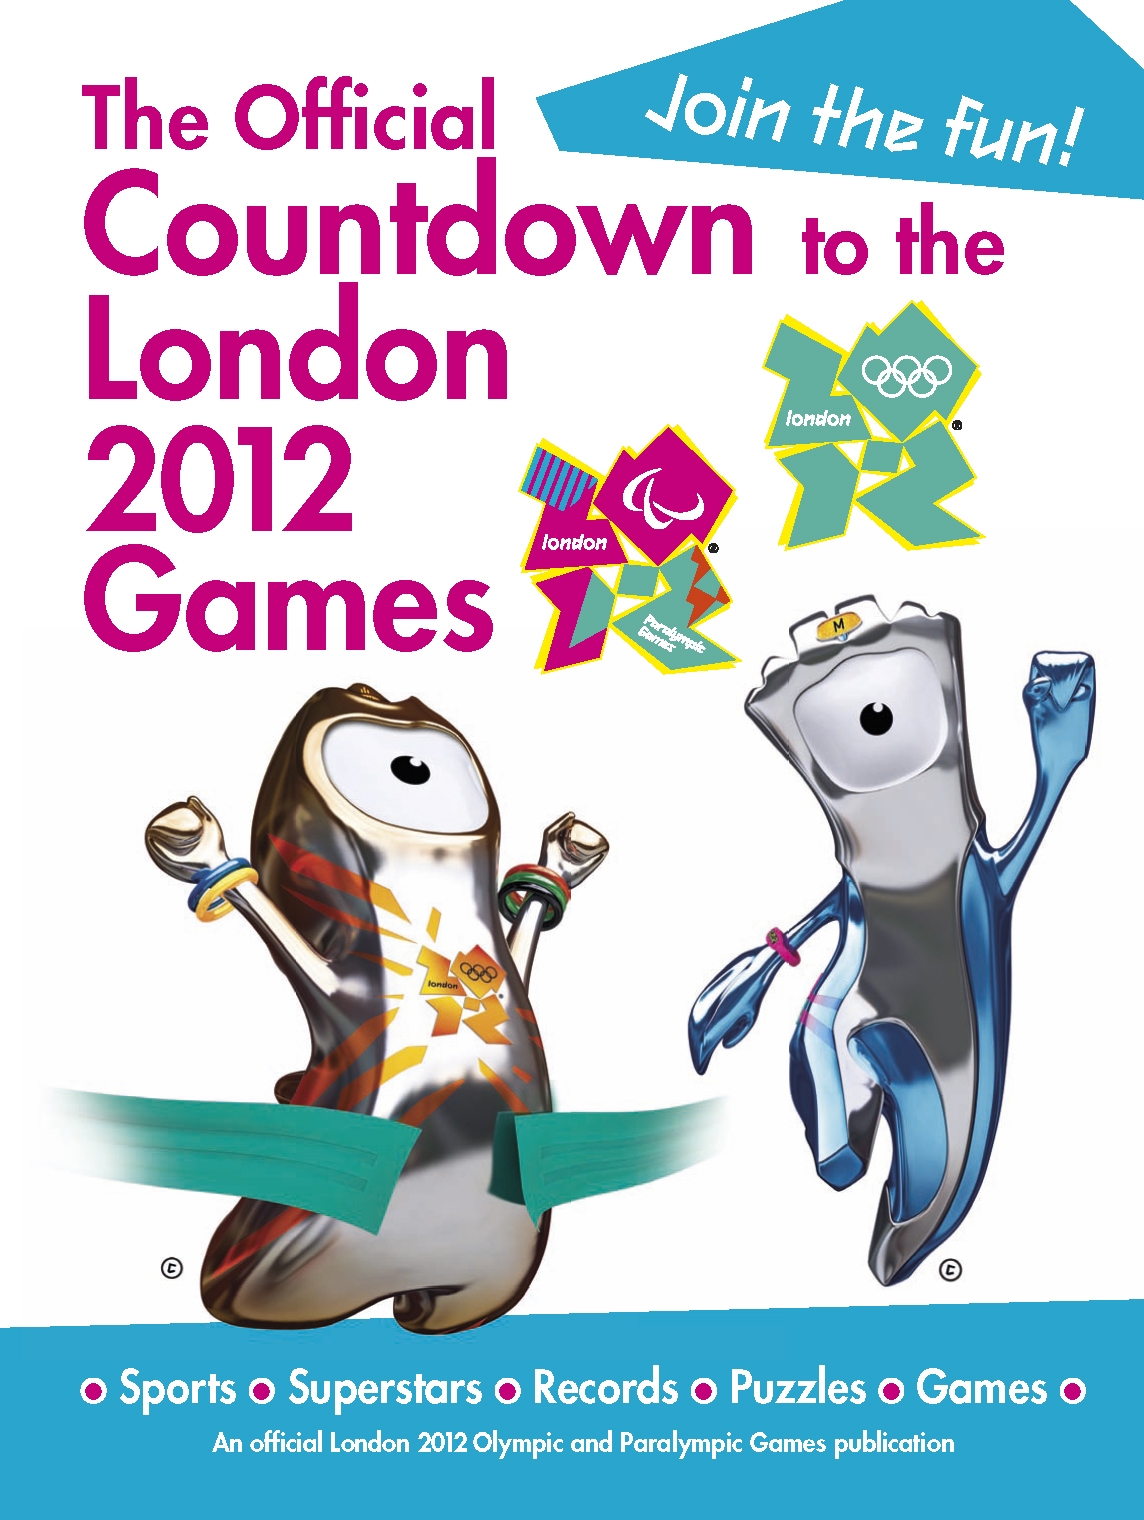 The Official Countdown to the 2012 London Games